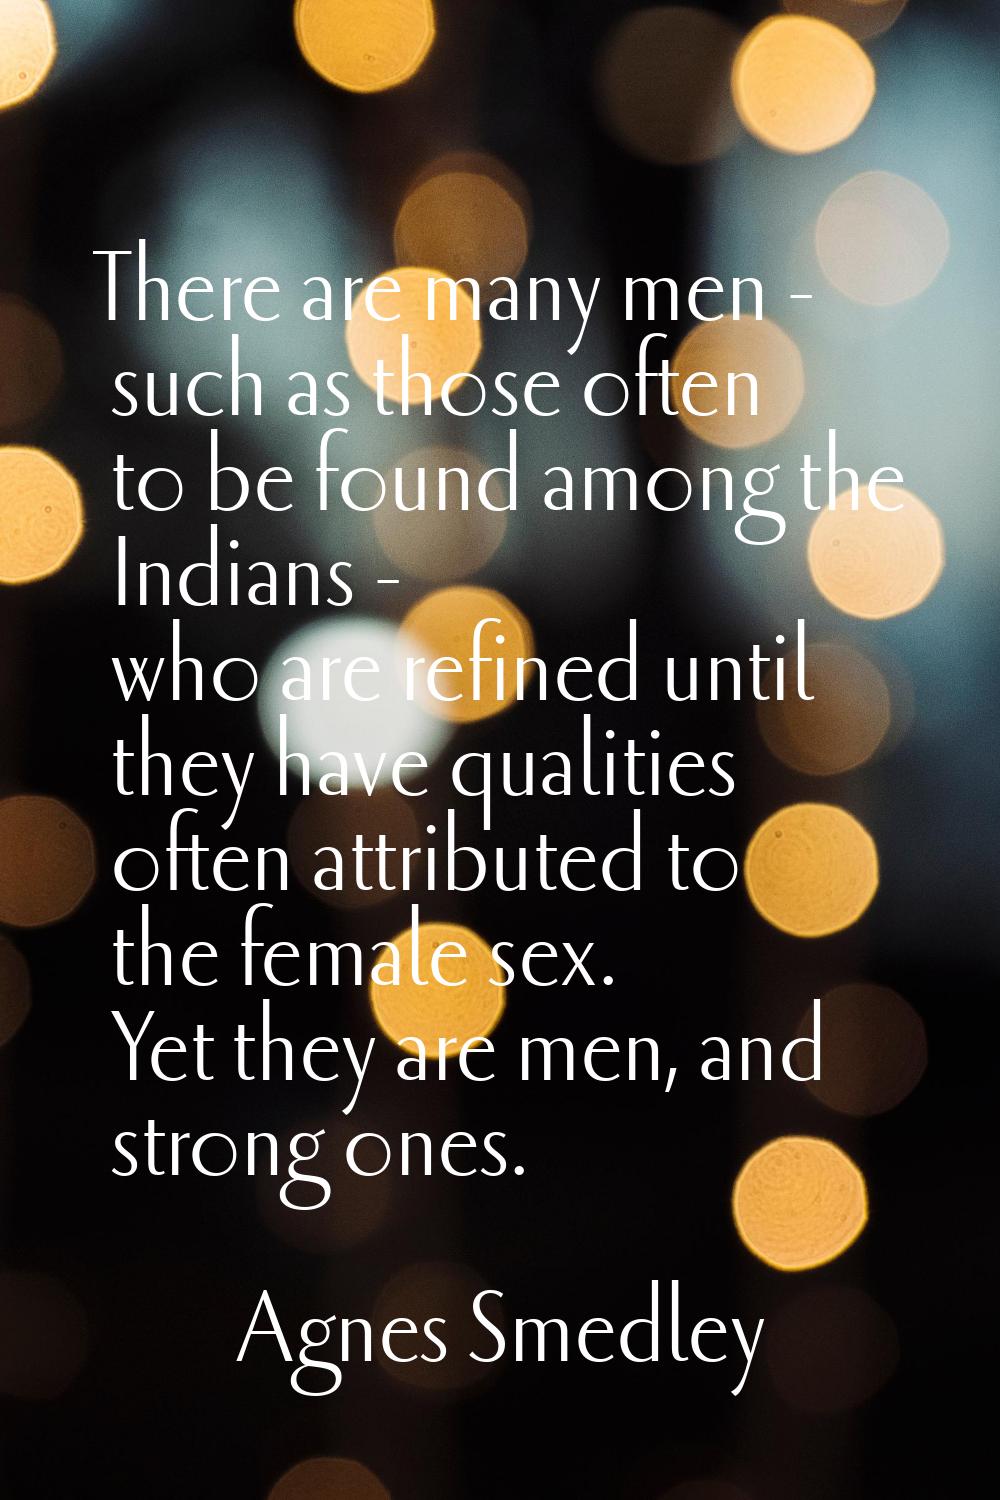 There are many men - such as those often to be found among the Indians - who are refined until they